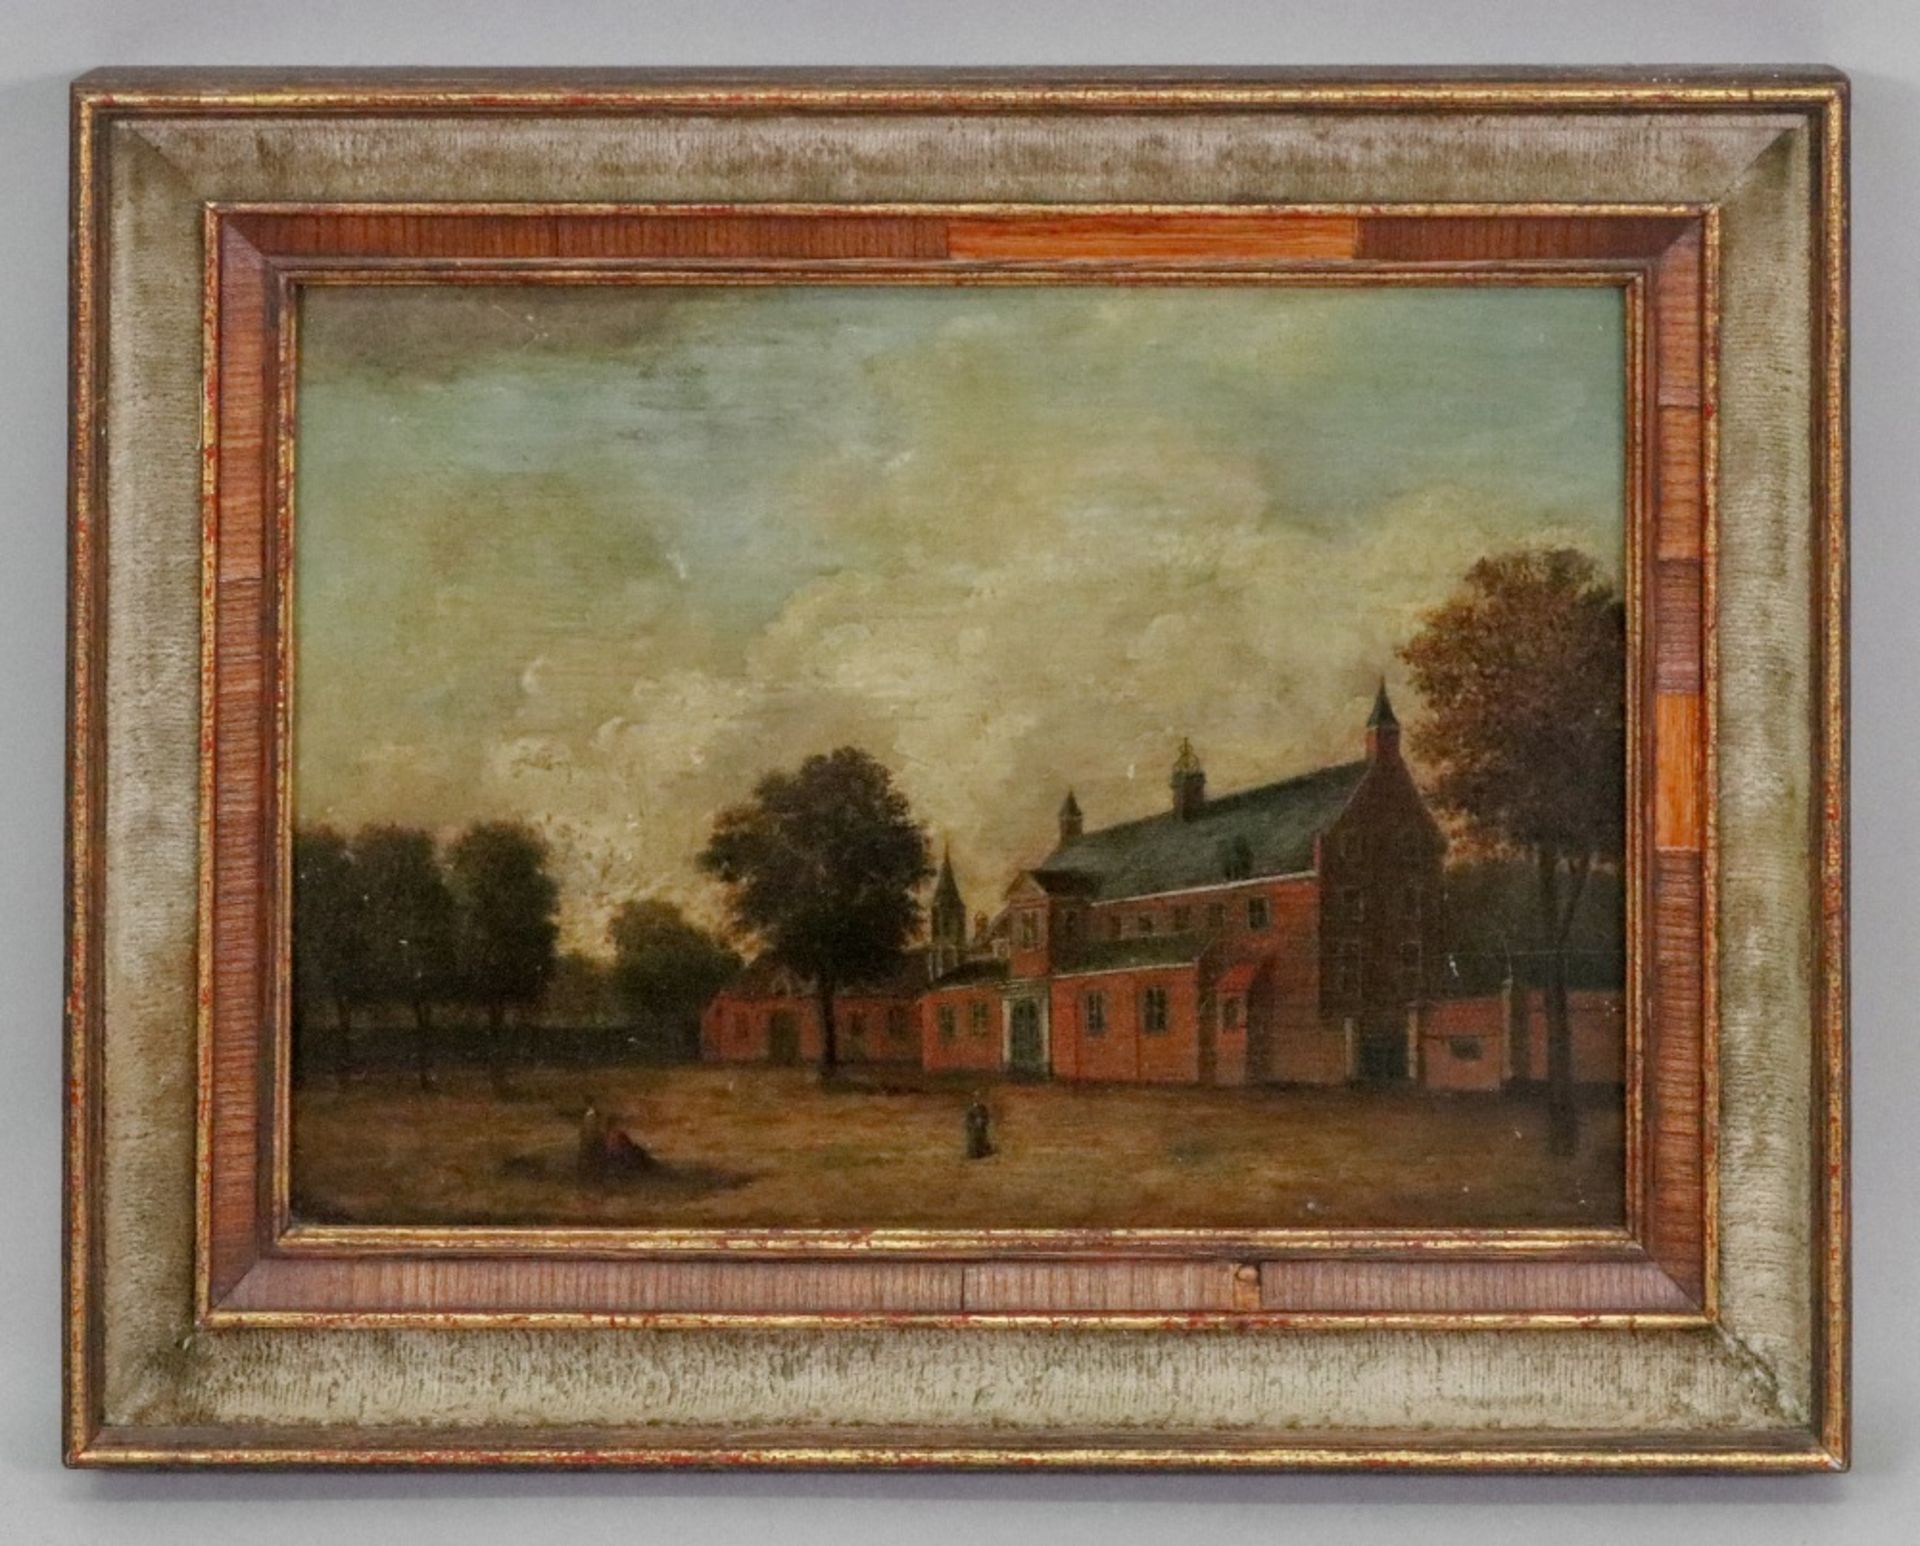 Northern European School, 18th Century, Three figures outside a building, oil on panel, 24 x 34cm. - Image 2 of 3